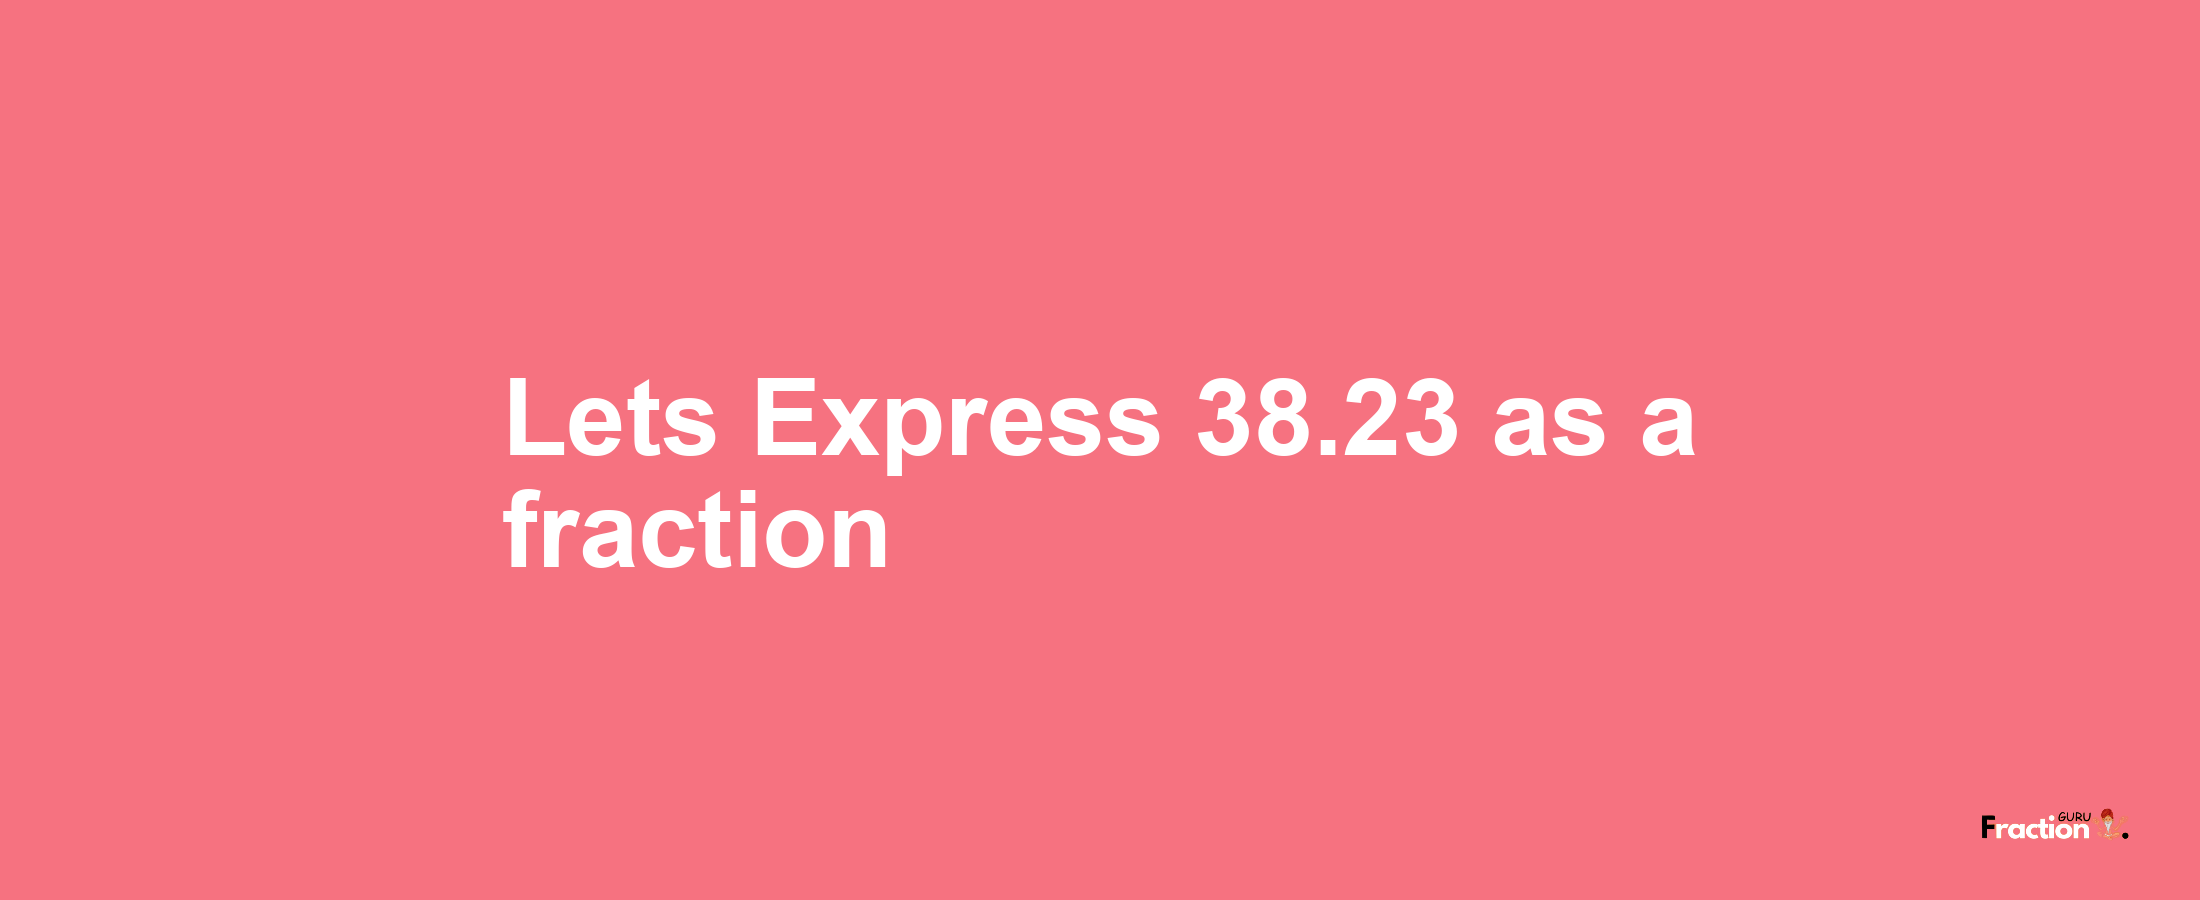 Lets Express 38.23 as afraction